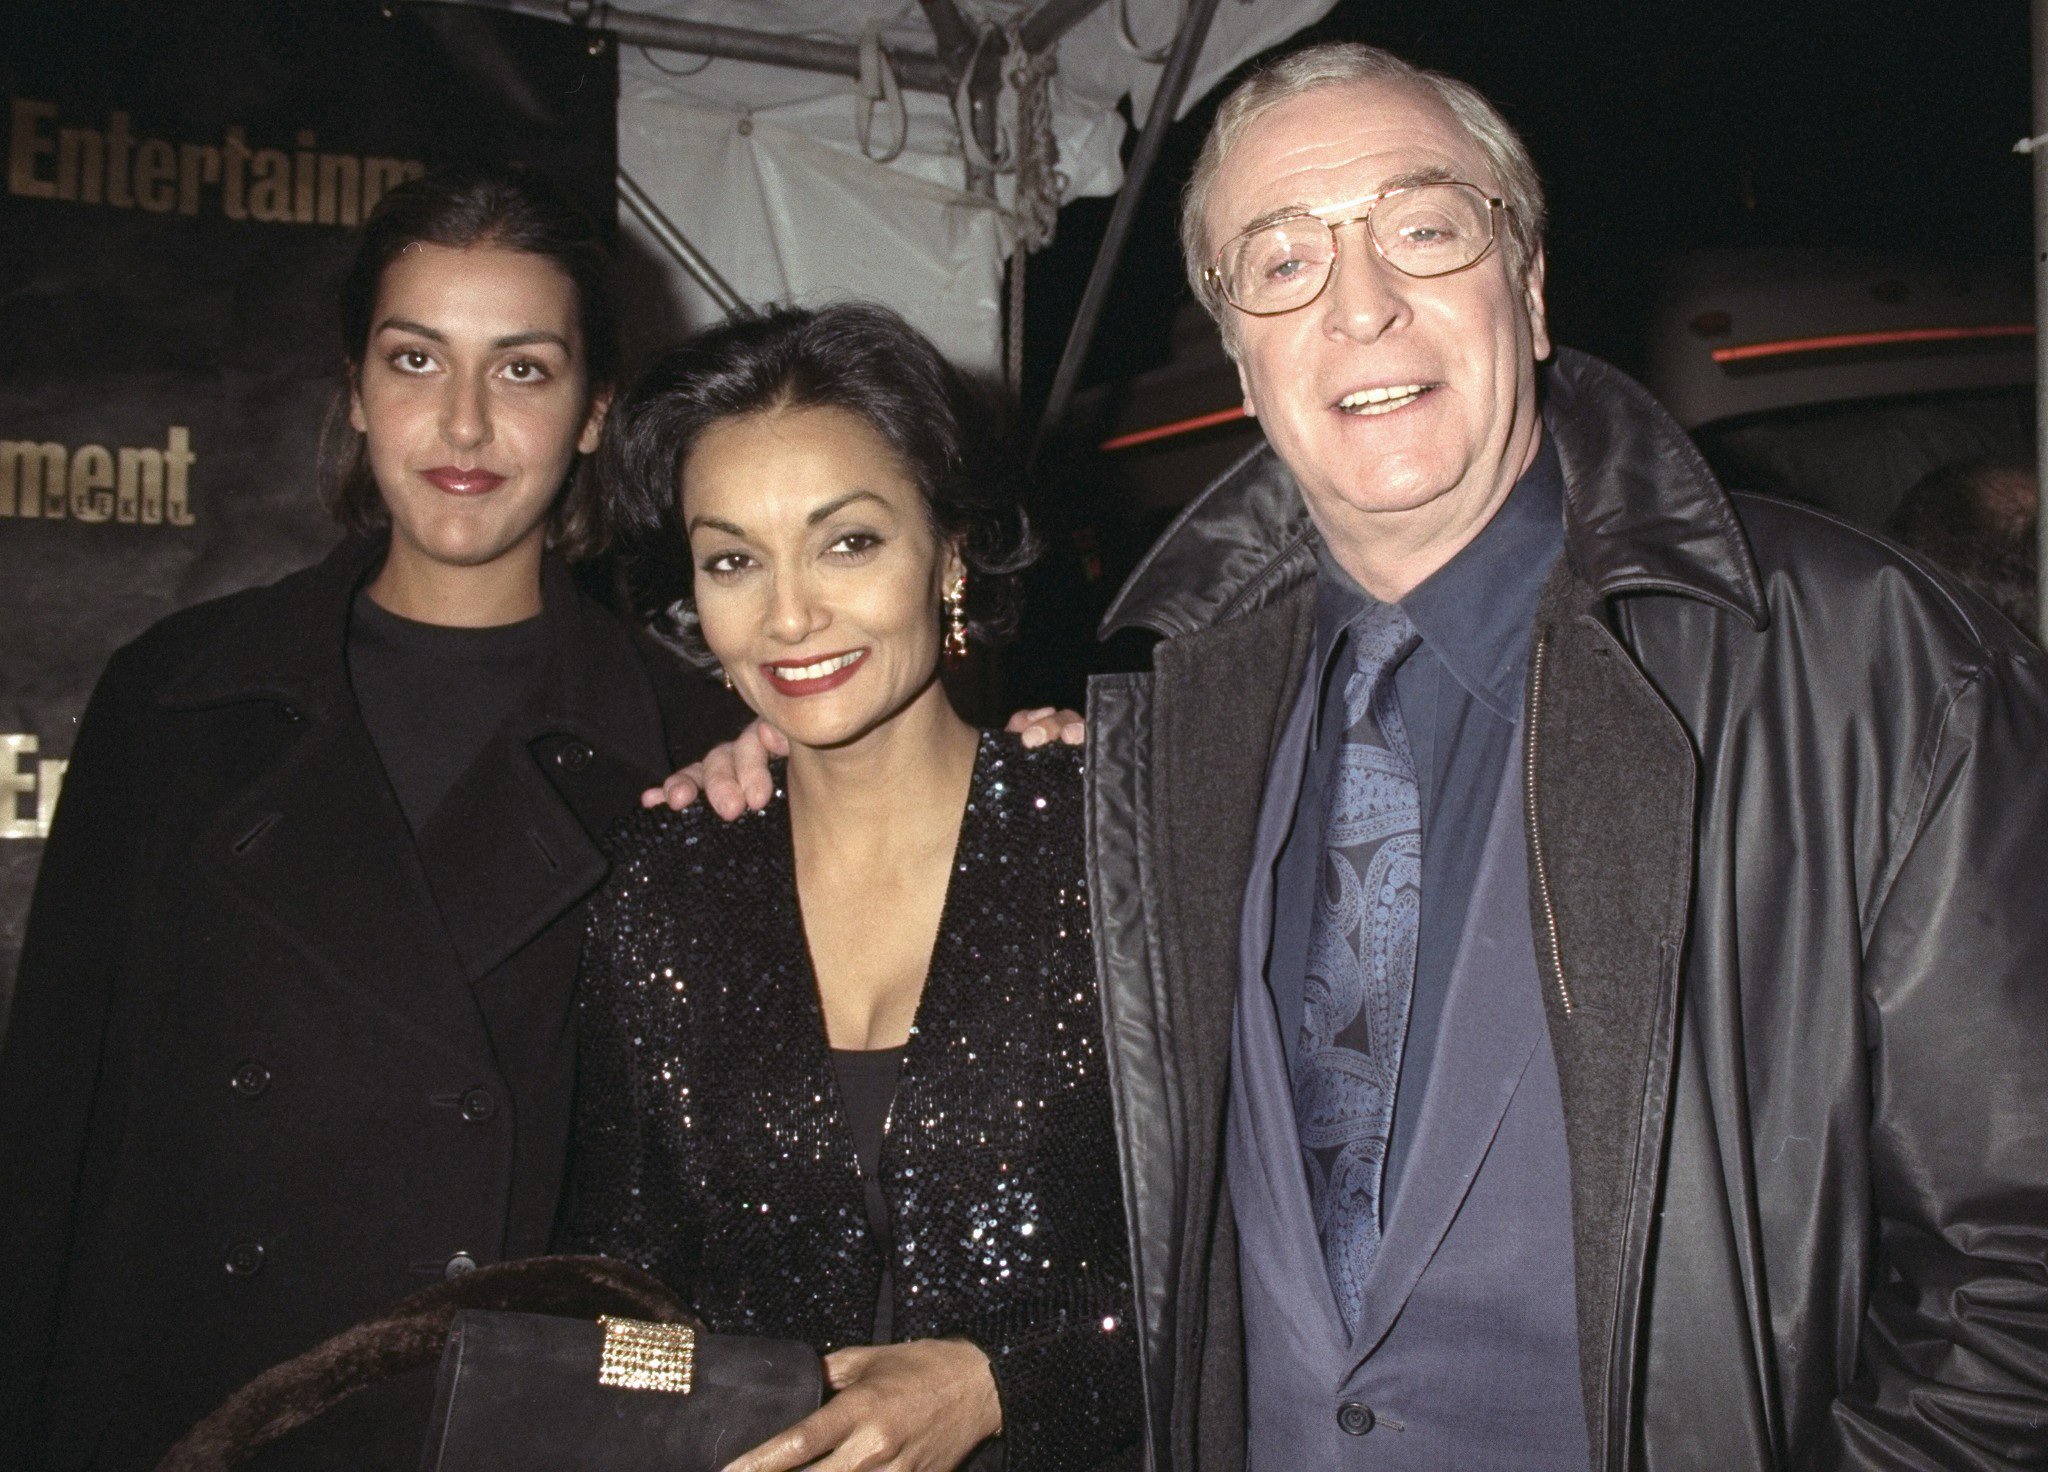 Michael Caine, with wife Shakira and daughter Natasha, attending Entertainment Weekly's Oscar party at Elaine's. | Source: Getty Images